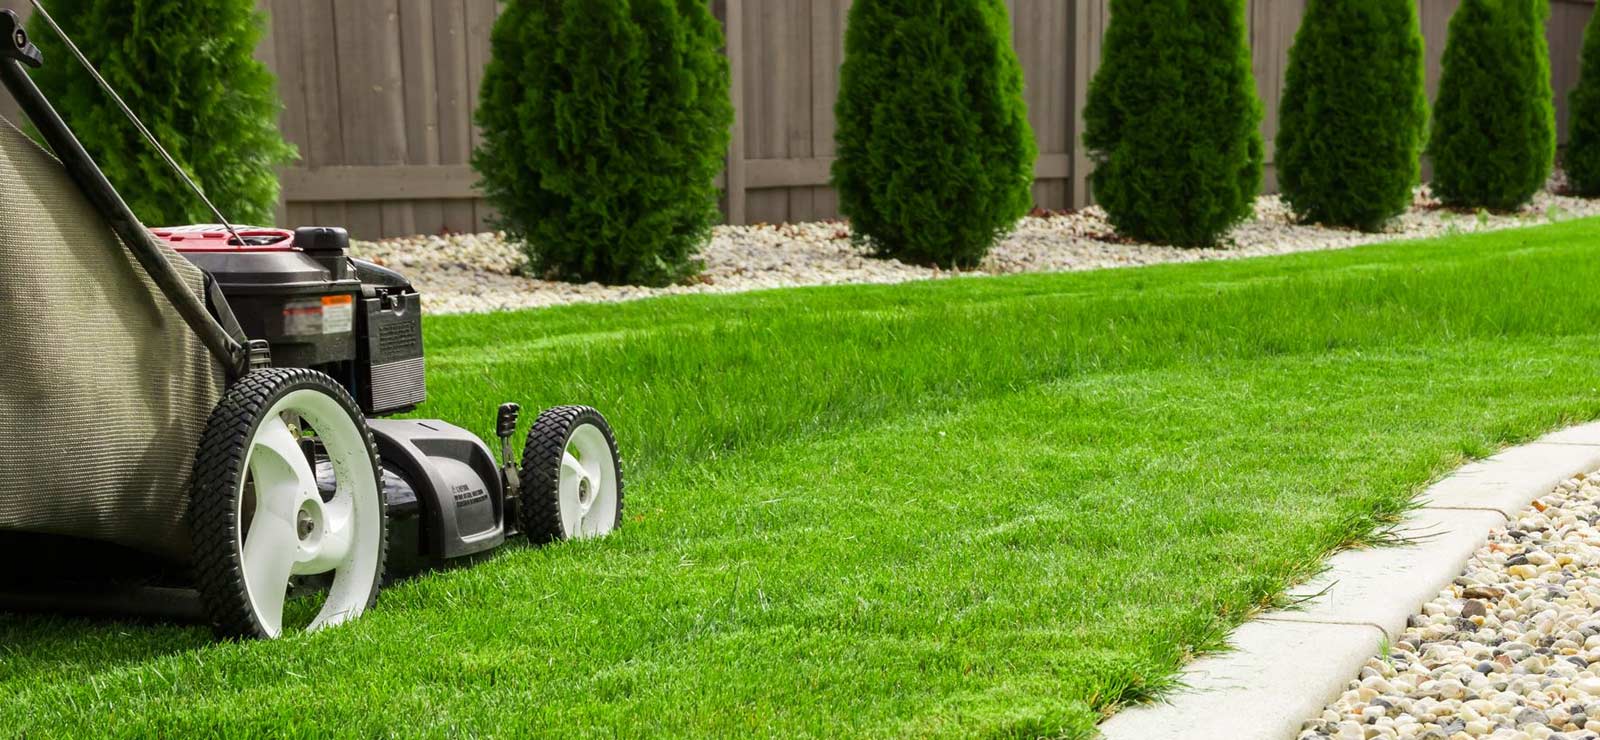 A picture of a lawn mower mowing grass alongside landscaping